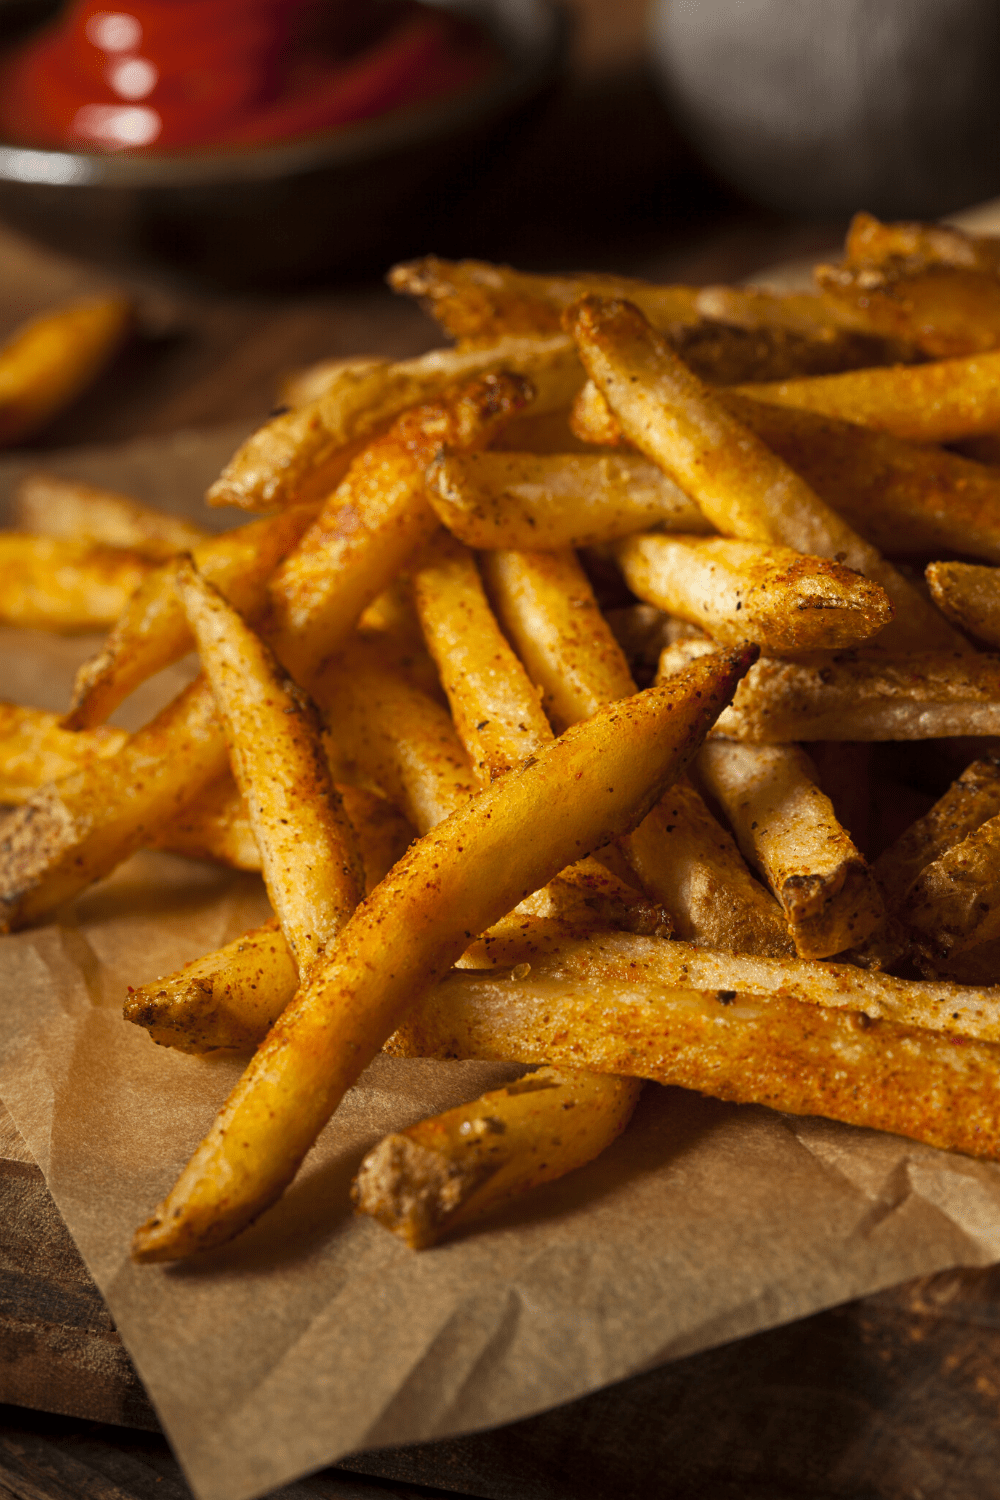 Bunch of fries on a brown parchment paper.